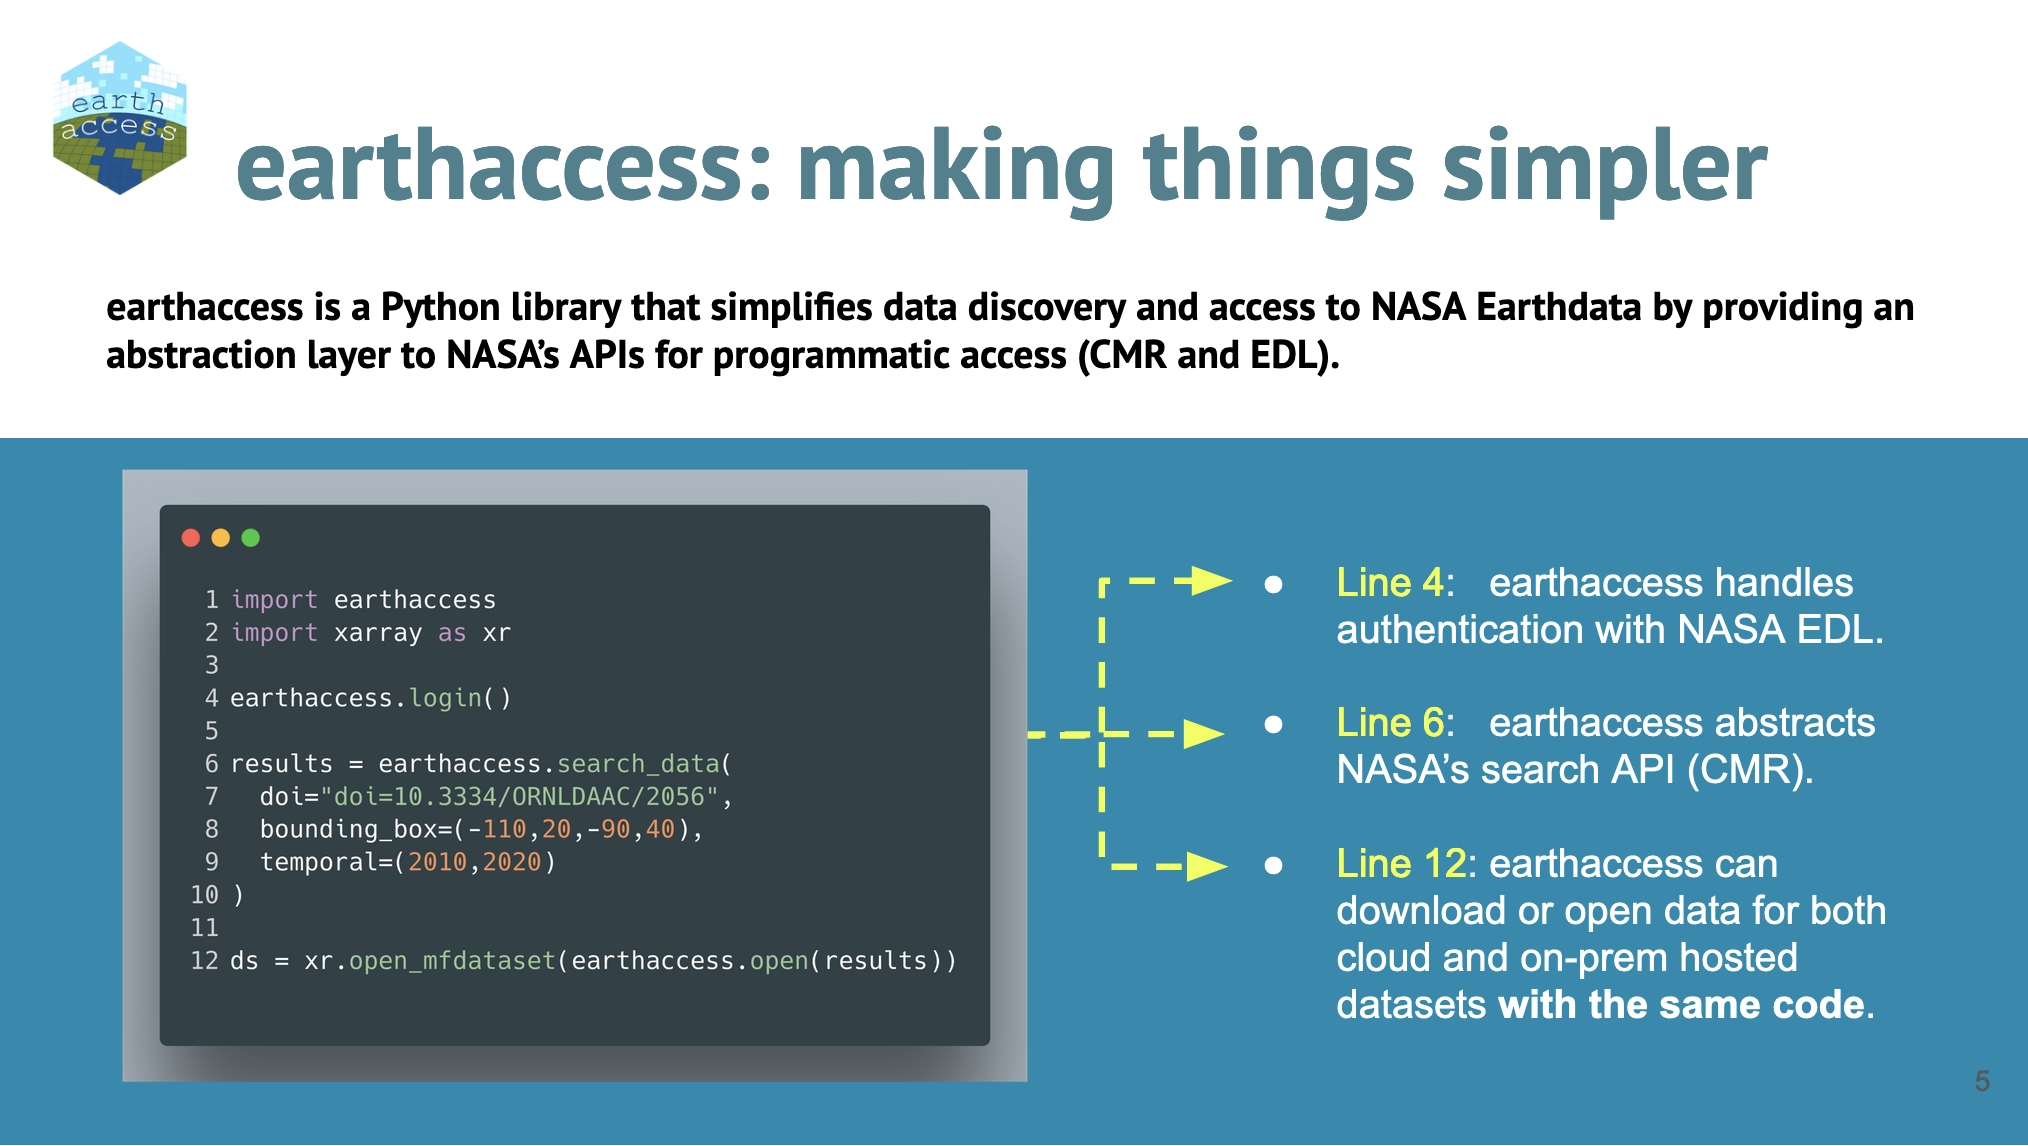 screenshot of slide 5 titled earthaccess: making things simpler. left side shows code; right side text says what the code does: Line 4:   earthaccess handles authentication with NASA EDL.  Line 6:   earthaccess abstracts NASA’s search API (CMR).  Line 12: earthaccess can download or open data for both cloud and on-prem hosted datasets with the same code.